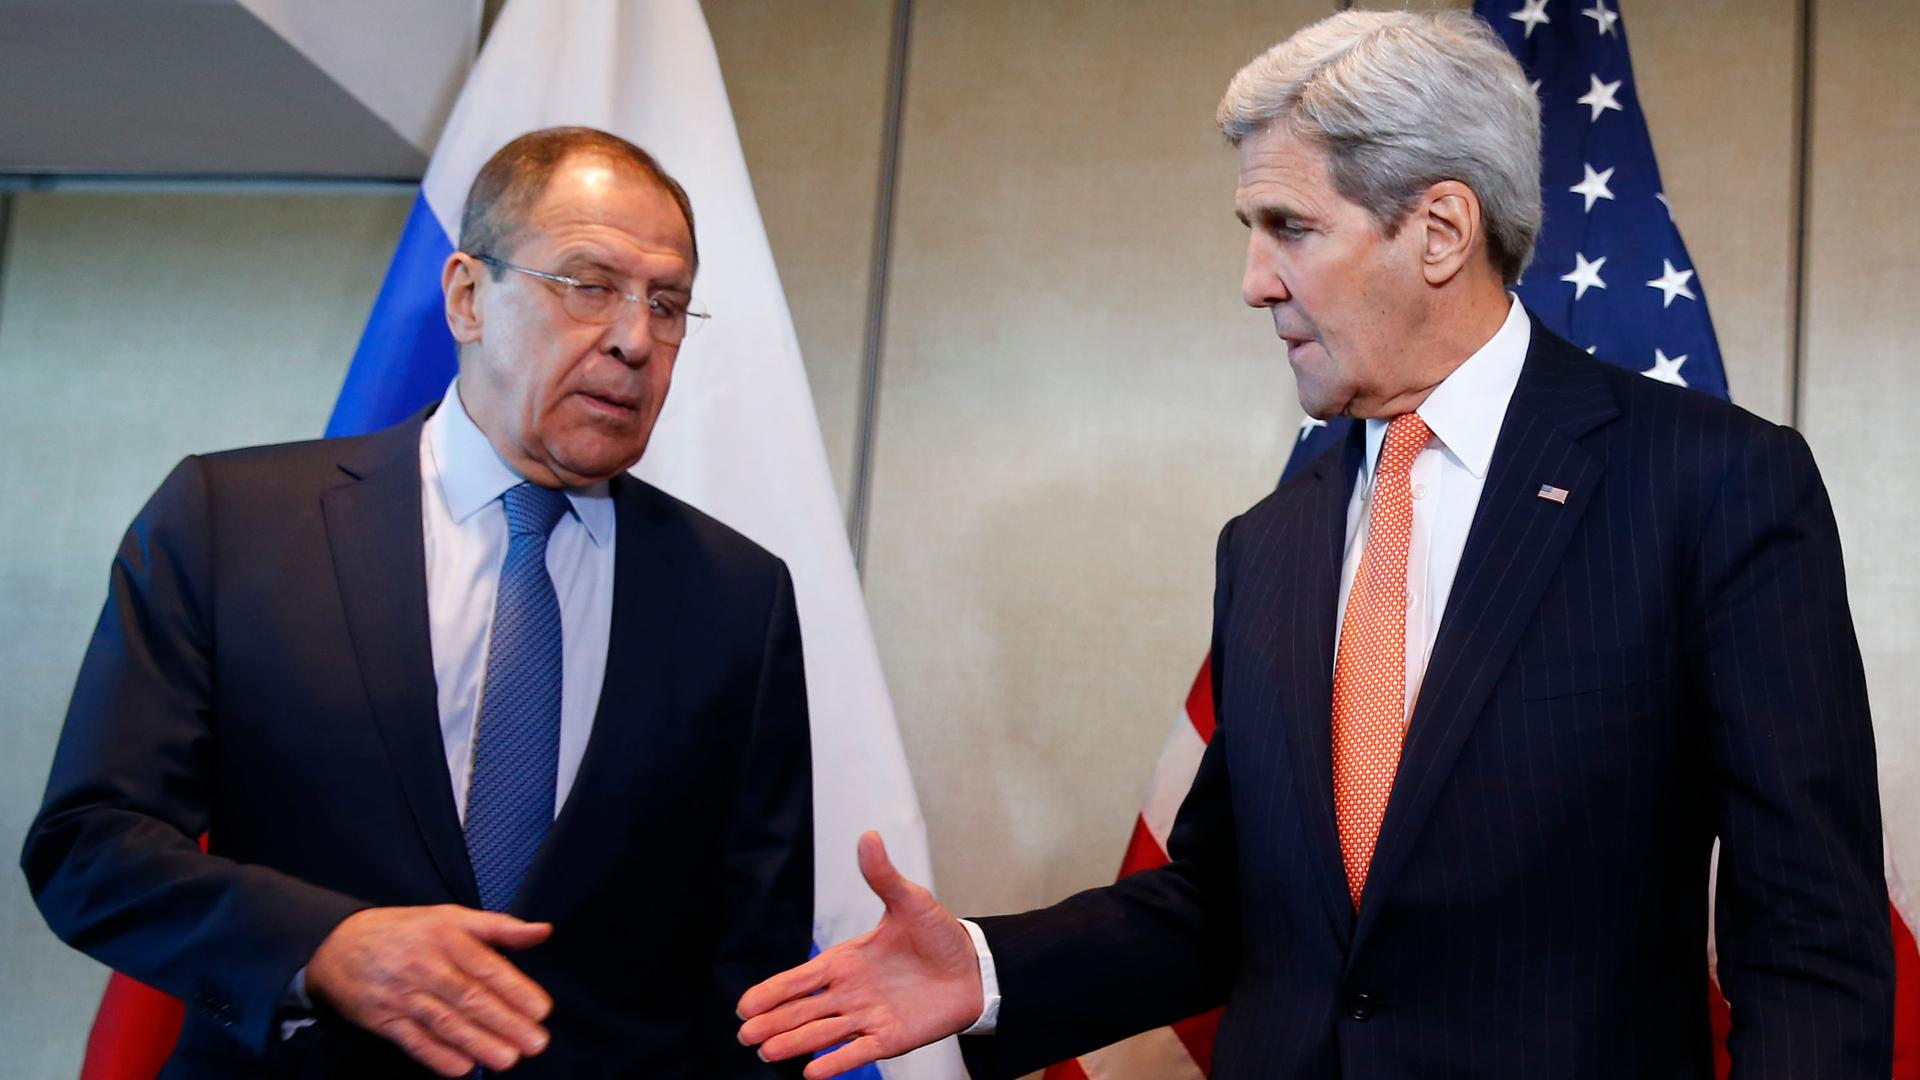 A hesitant deal in Munich. Secretary of State John Kerry prepares to shake hands with his Russian counterpart, Sergei Lavrov.